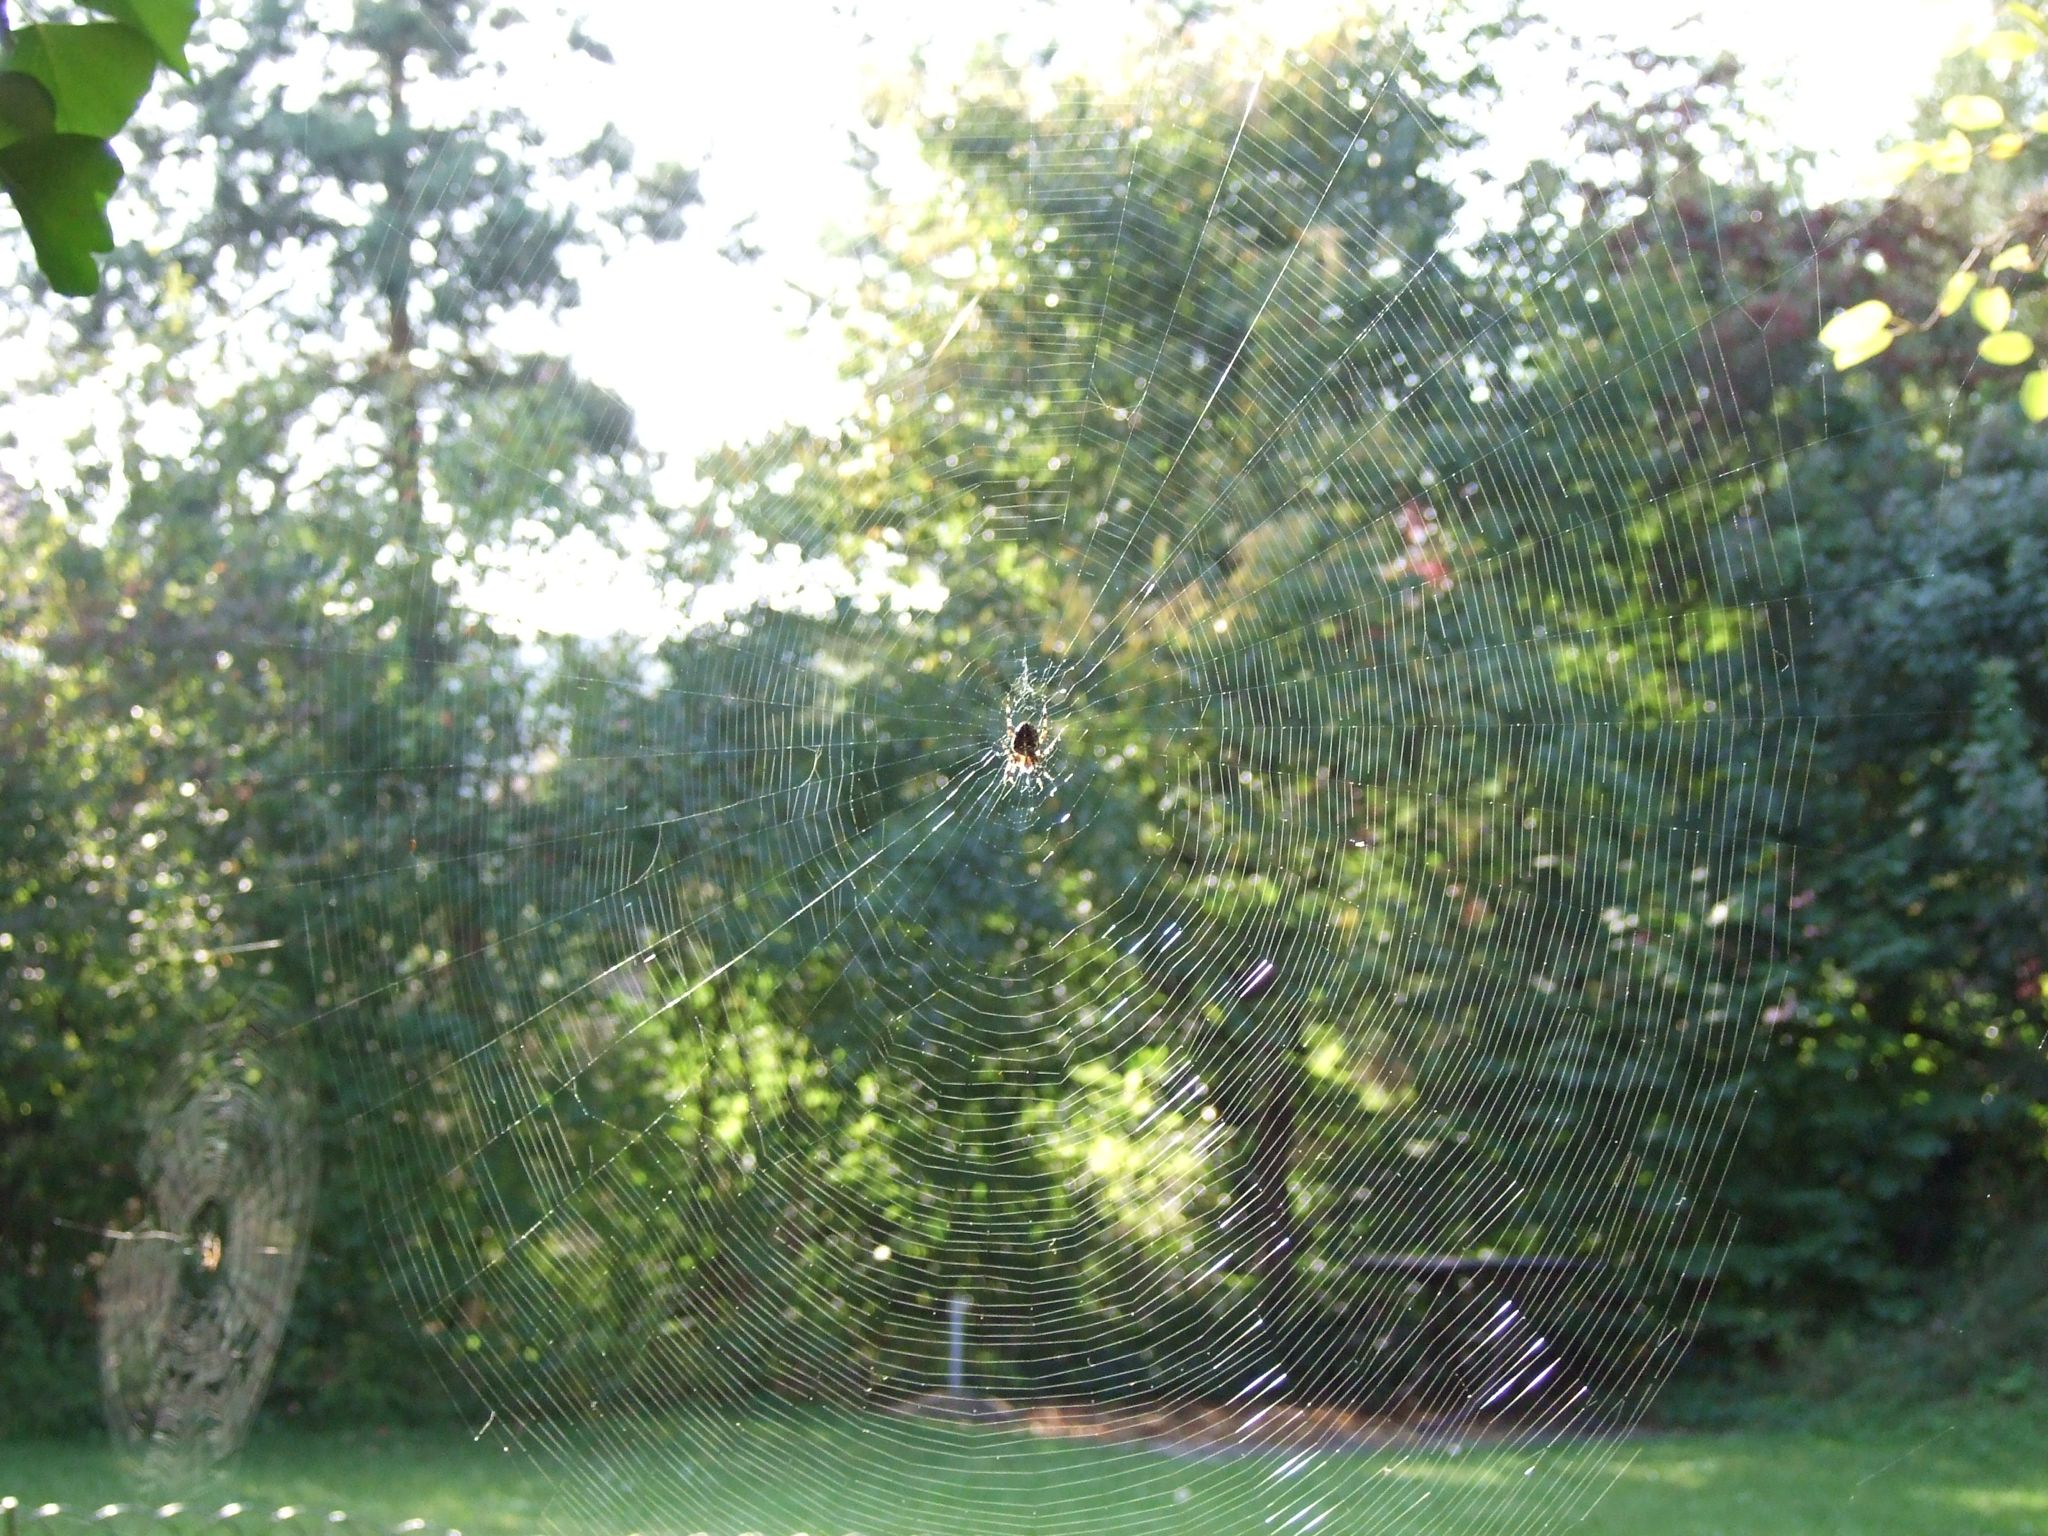 Photo 10 of 23 from the album Spiders.